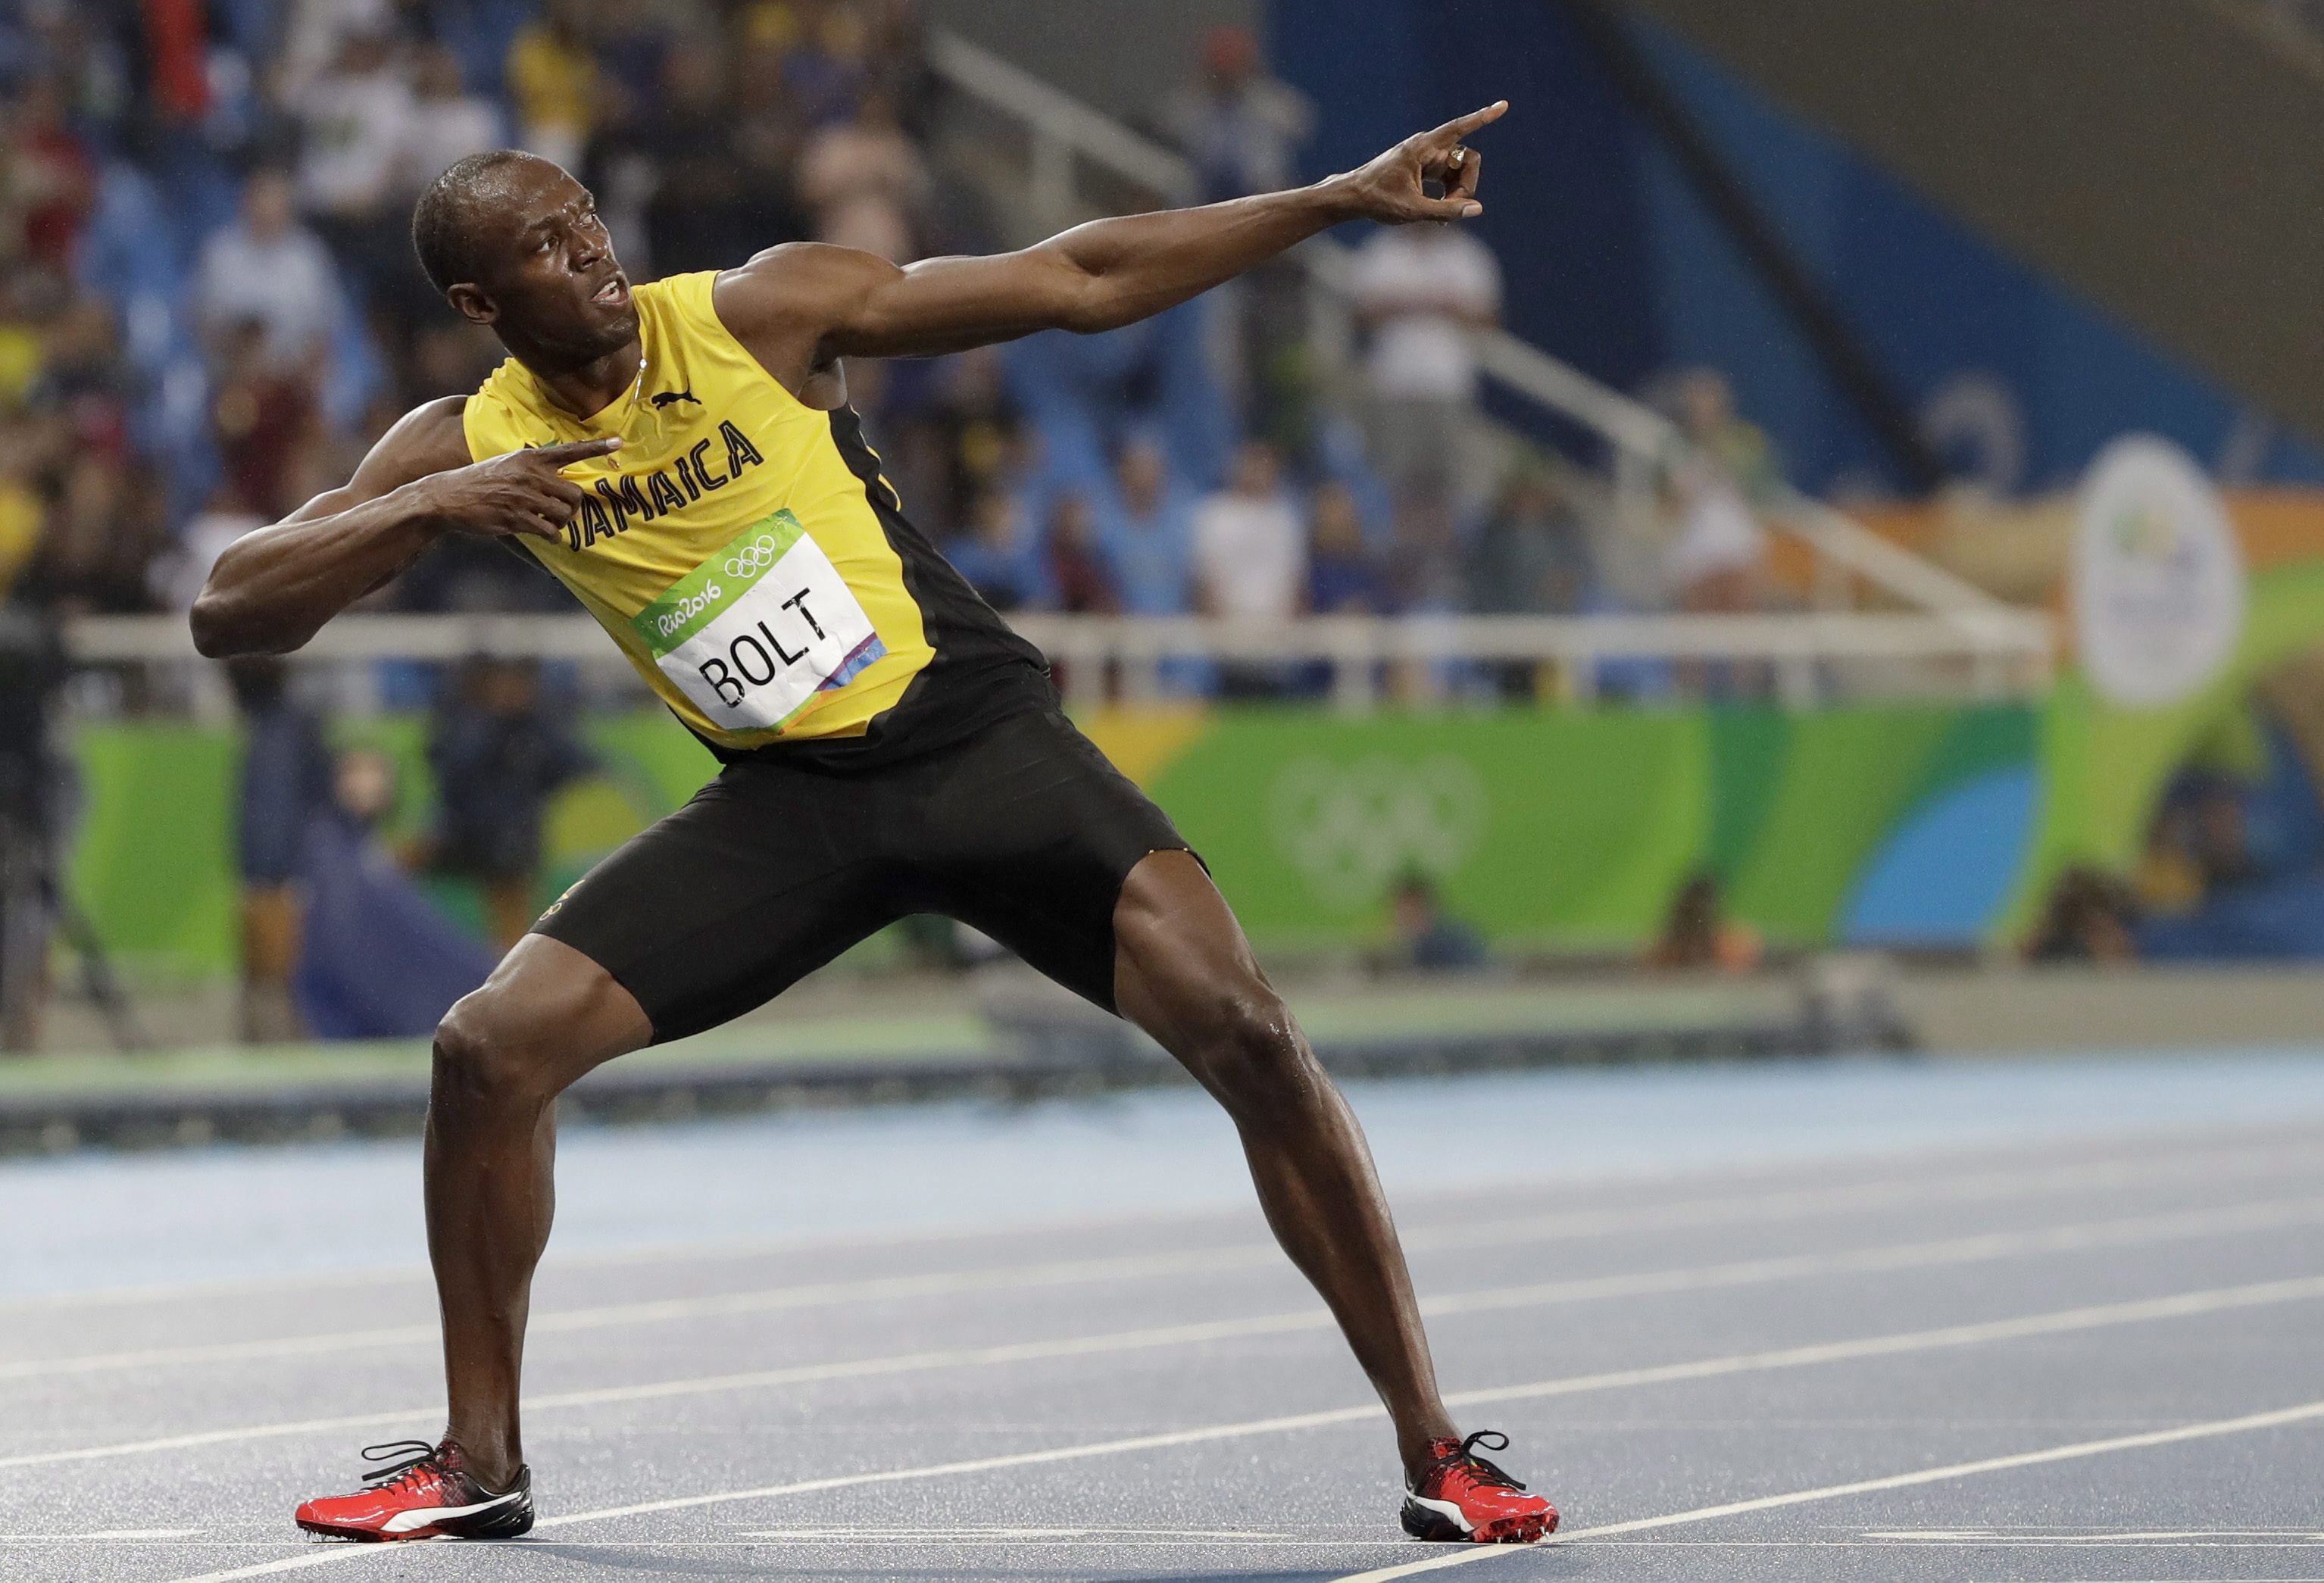 Usain Bolt from Jamaica celebrates winning the gold medal in the men's 200-meter final during the athletics competitions of the 2016 Summer Olympics at the Olympic stadium in Rio de Janeiro, Brazil. (AP Photo/David J. Phillip)